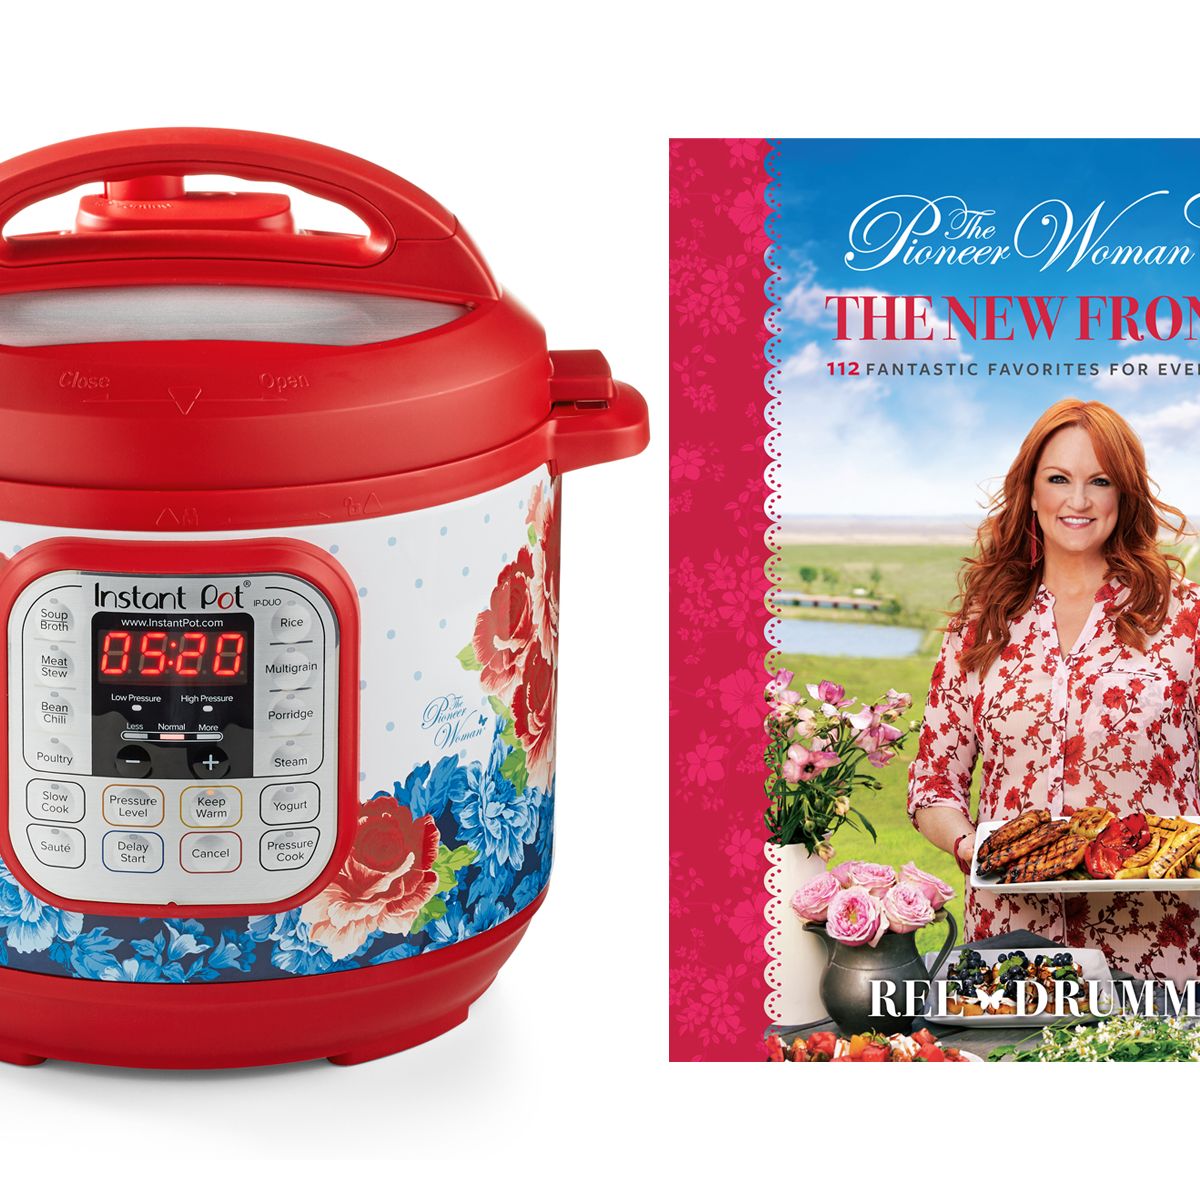 New PW Instant Pot + The New Frontier (Winners!)